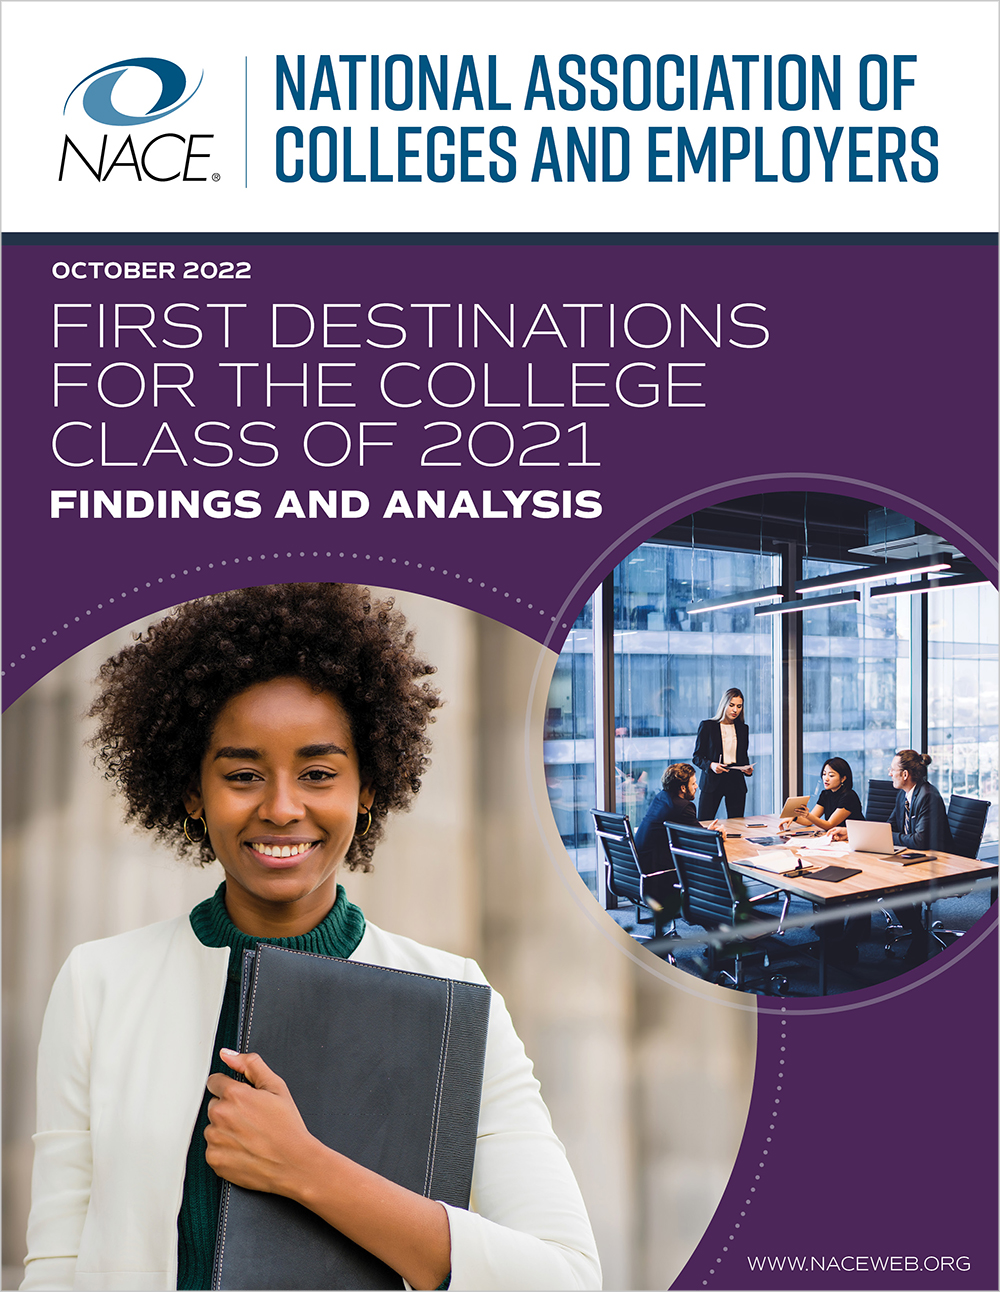 Download the printed report for the First Destinations for the College Class of 2021